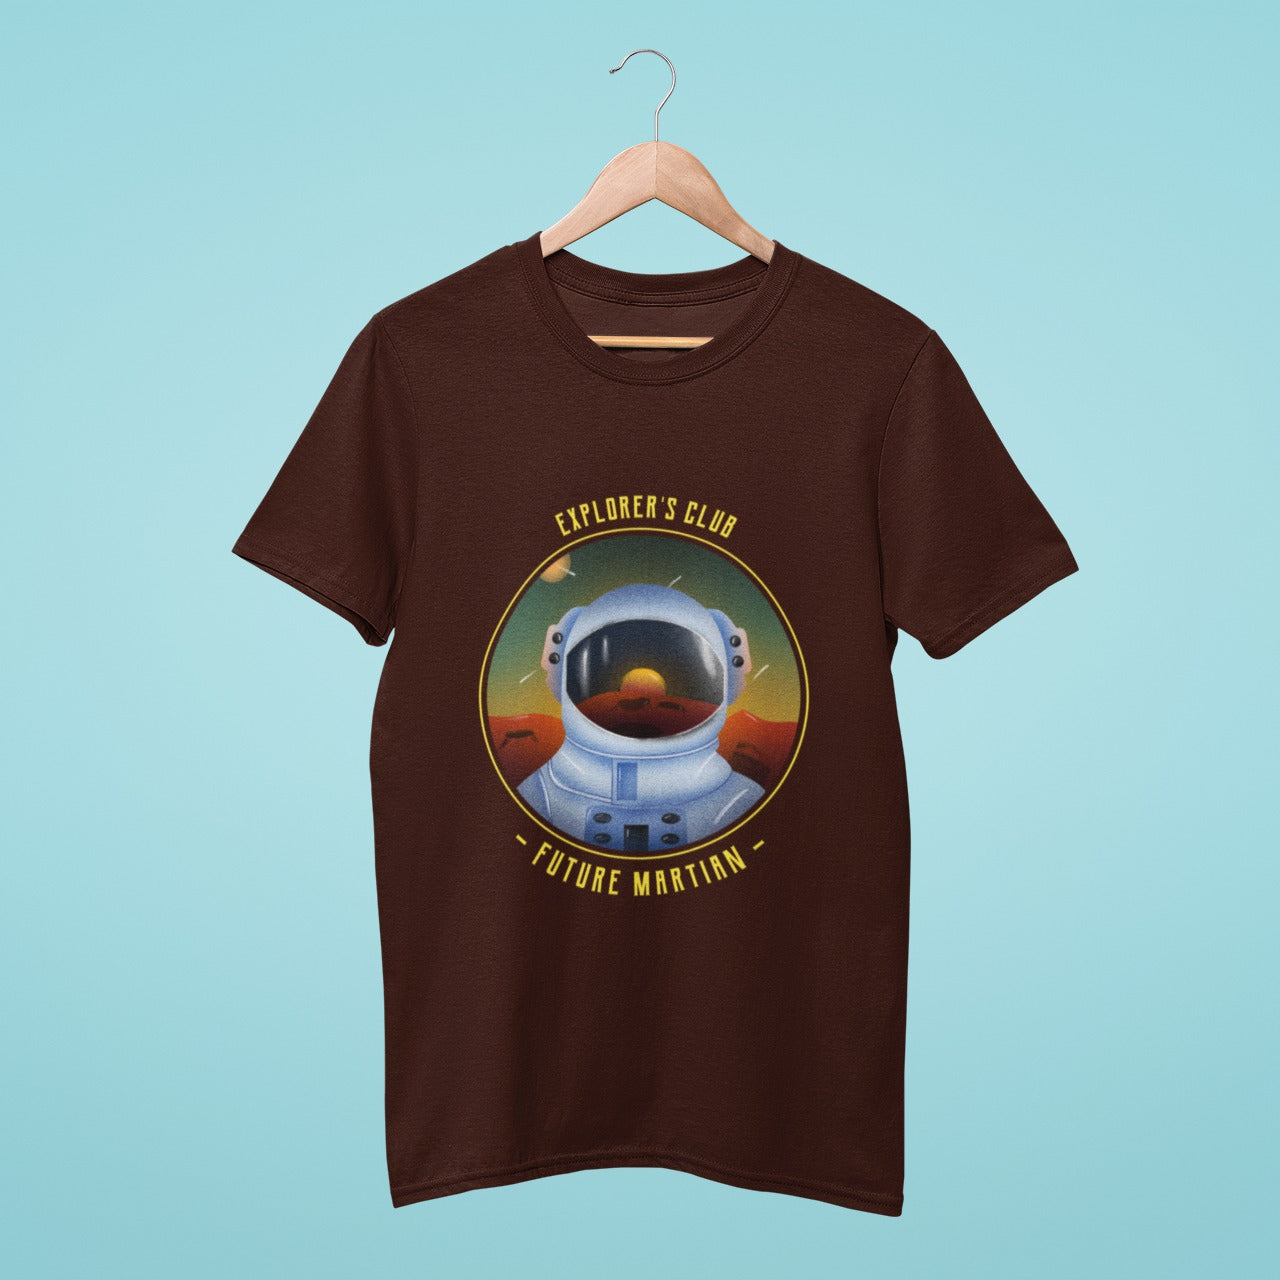 oin the Explorer's Club and gear up for the future Martian mission with this brown t-shirt. Featuring an astronaut in spacesuit on the Martian surface with a reflection of the rising sun, this shirt is the perfect addition to your space-themed wardrobe.